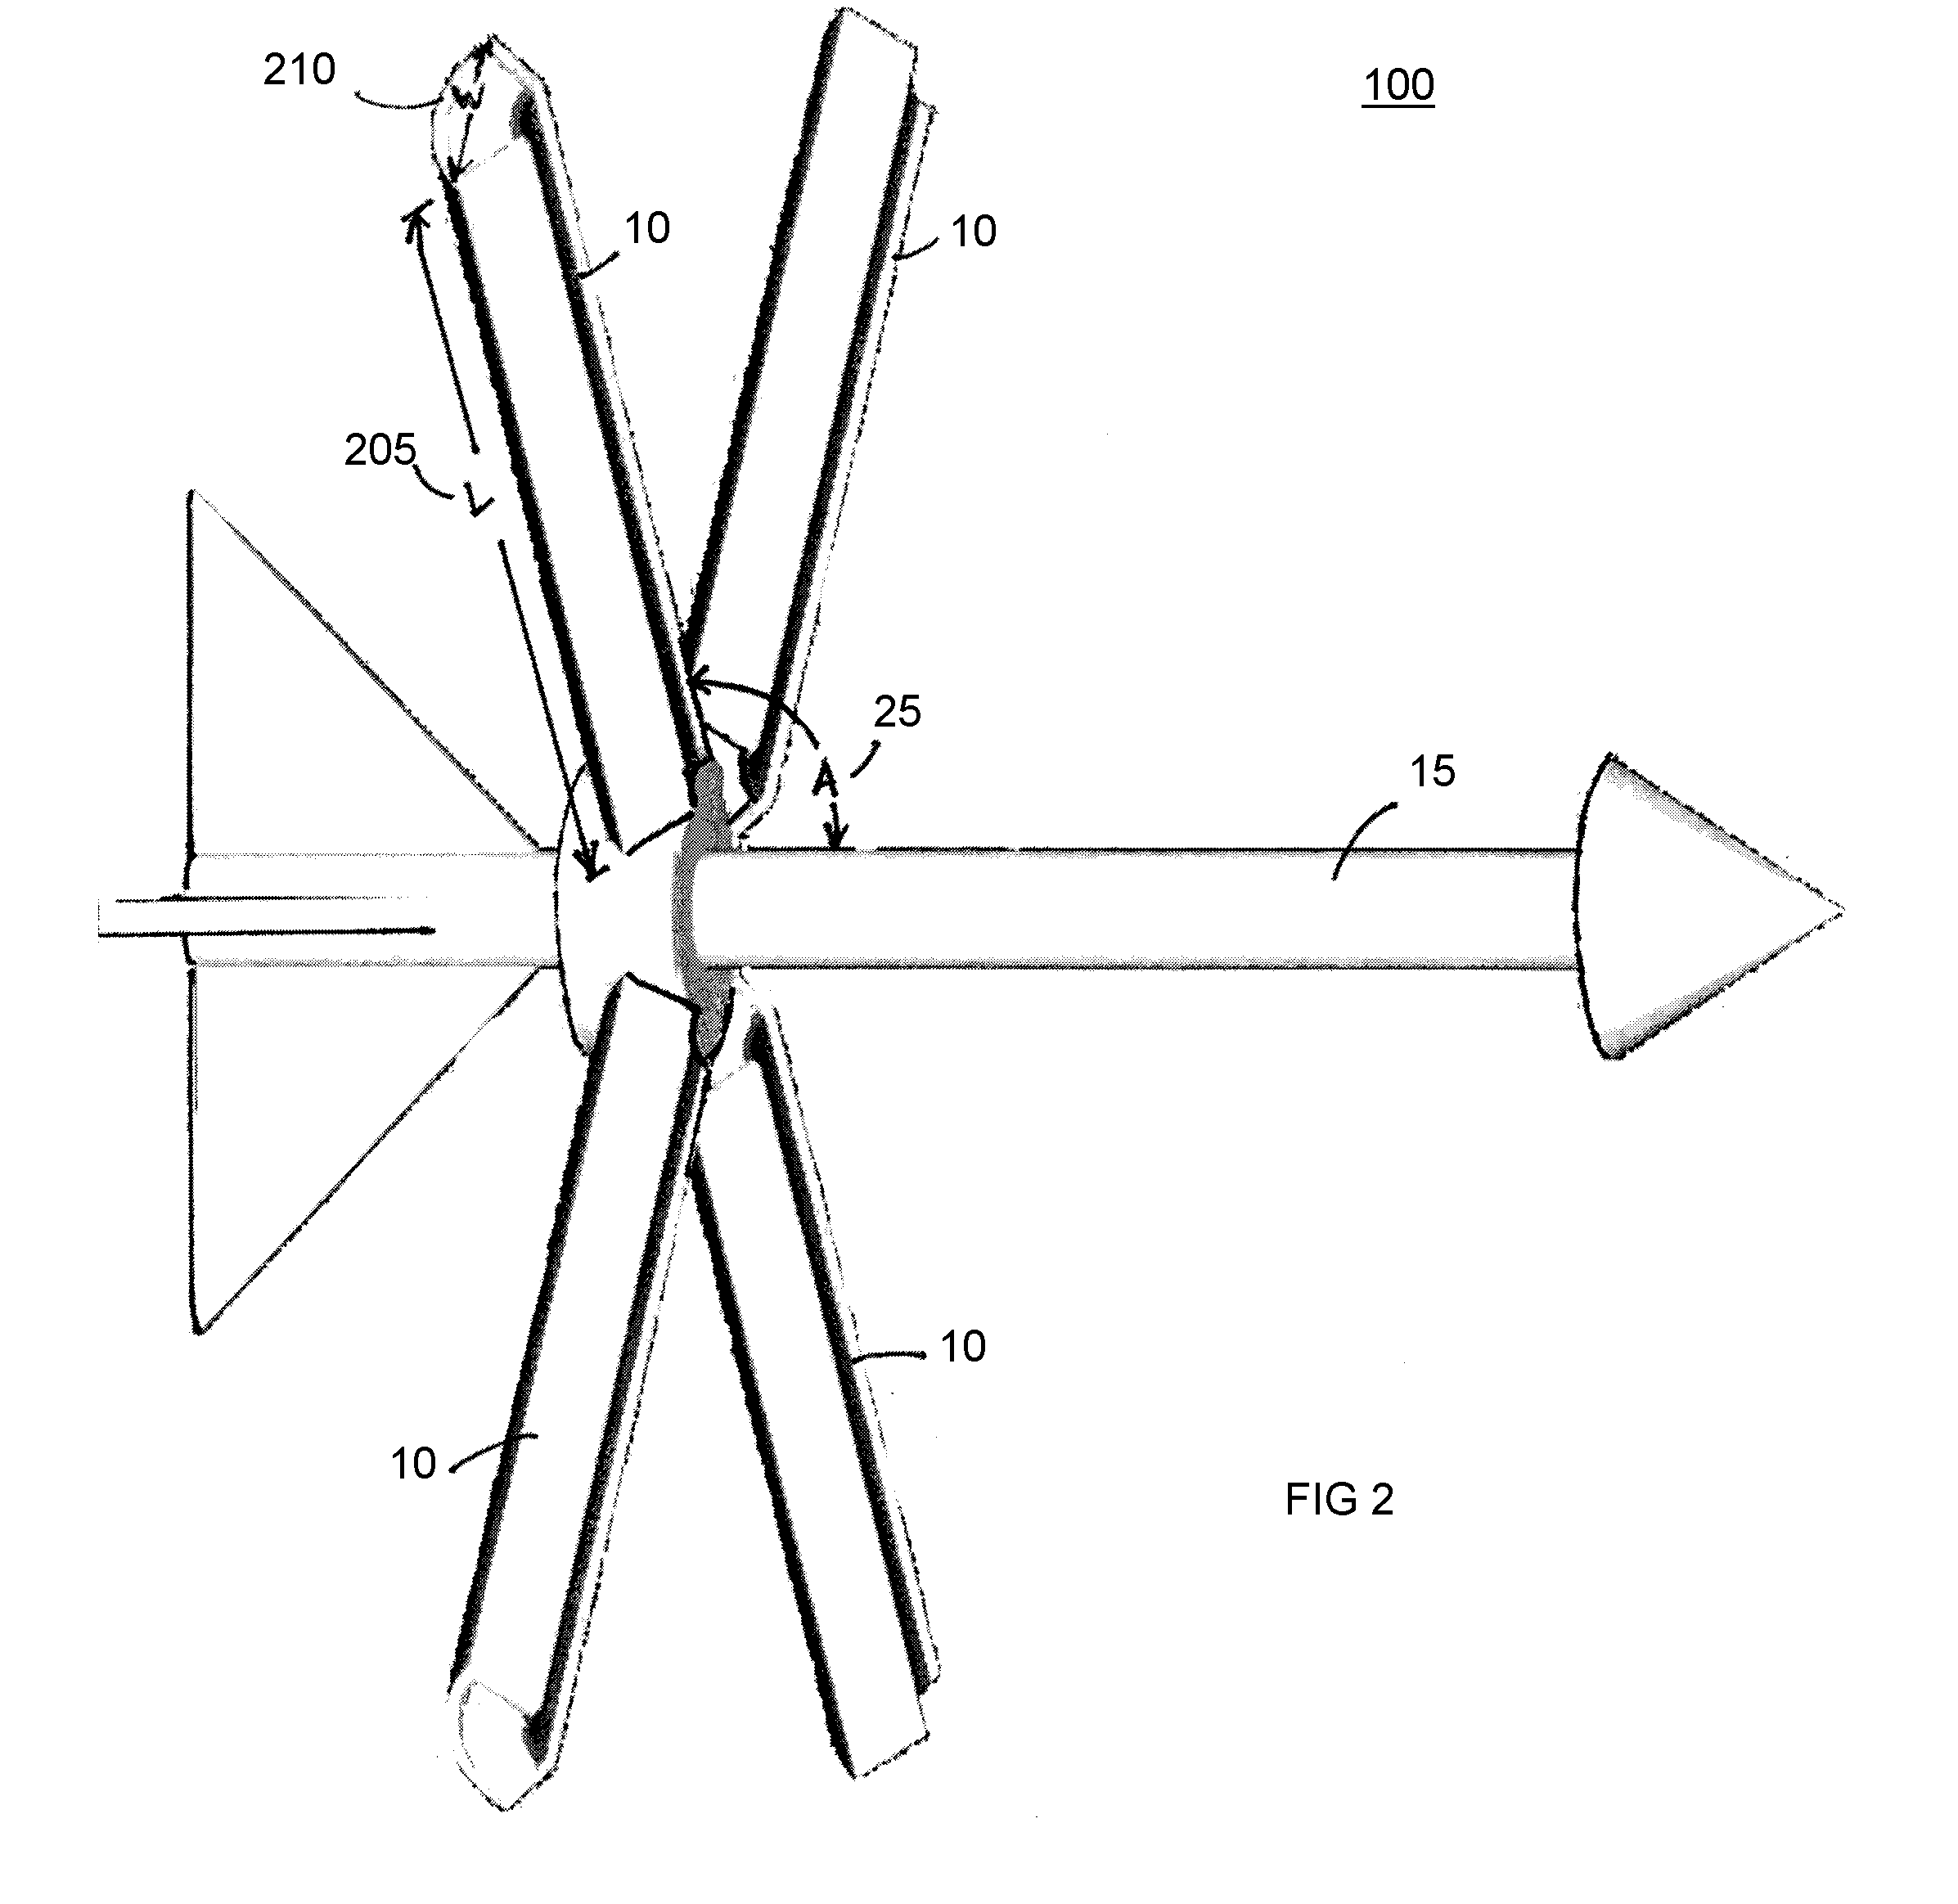 Missile system for breaching reinforced concrete barriers utilizing hinged explosively formed projectile warheads